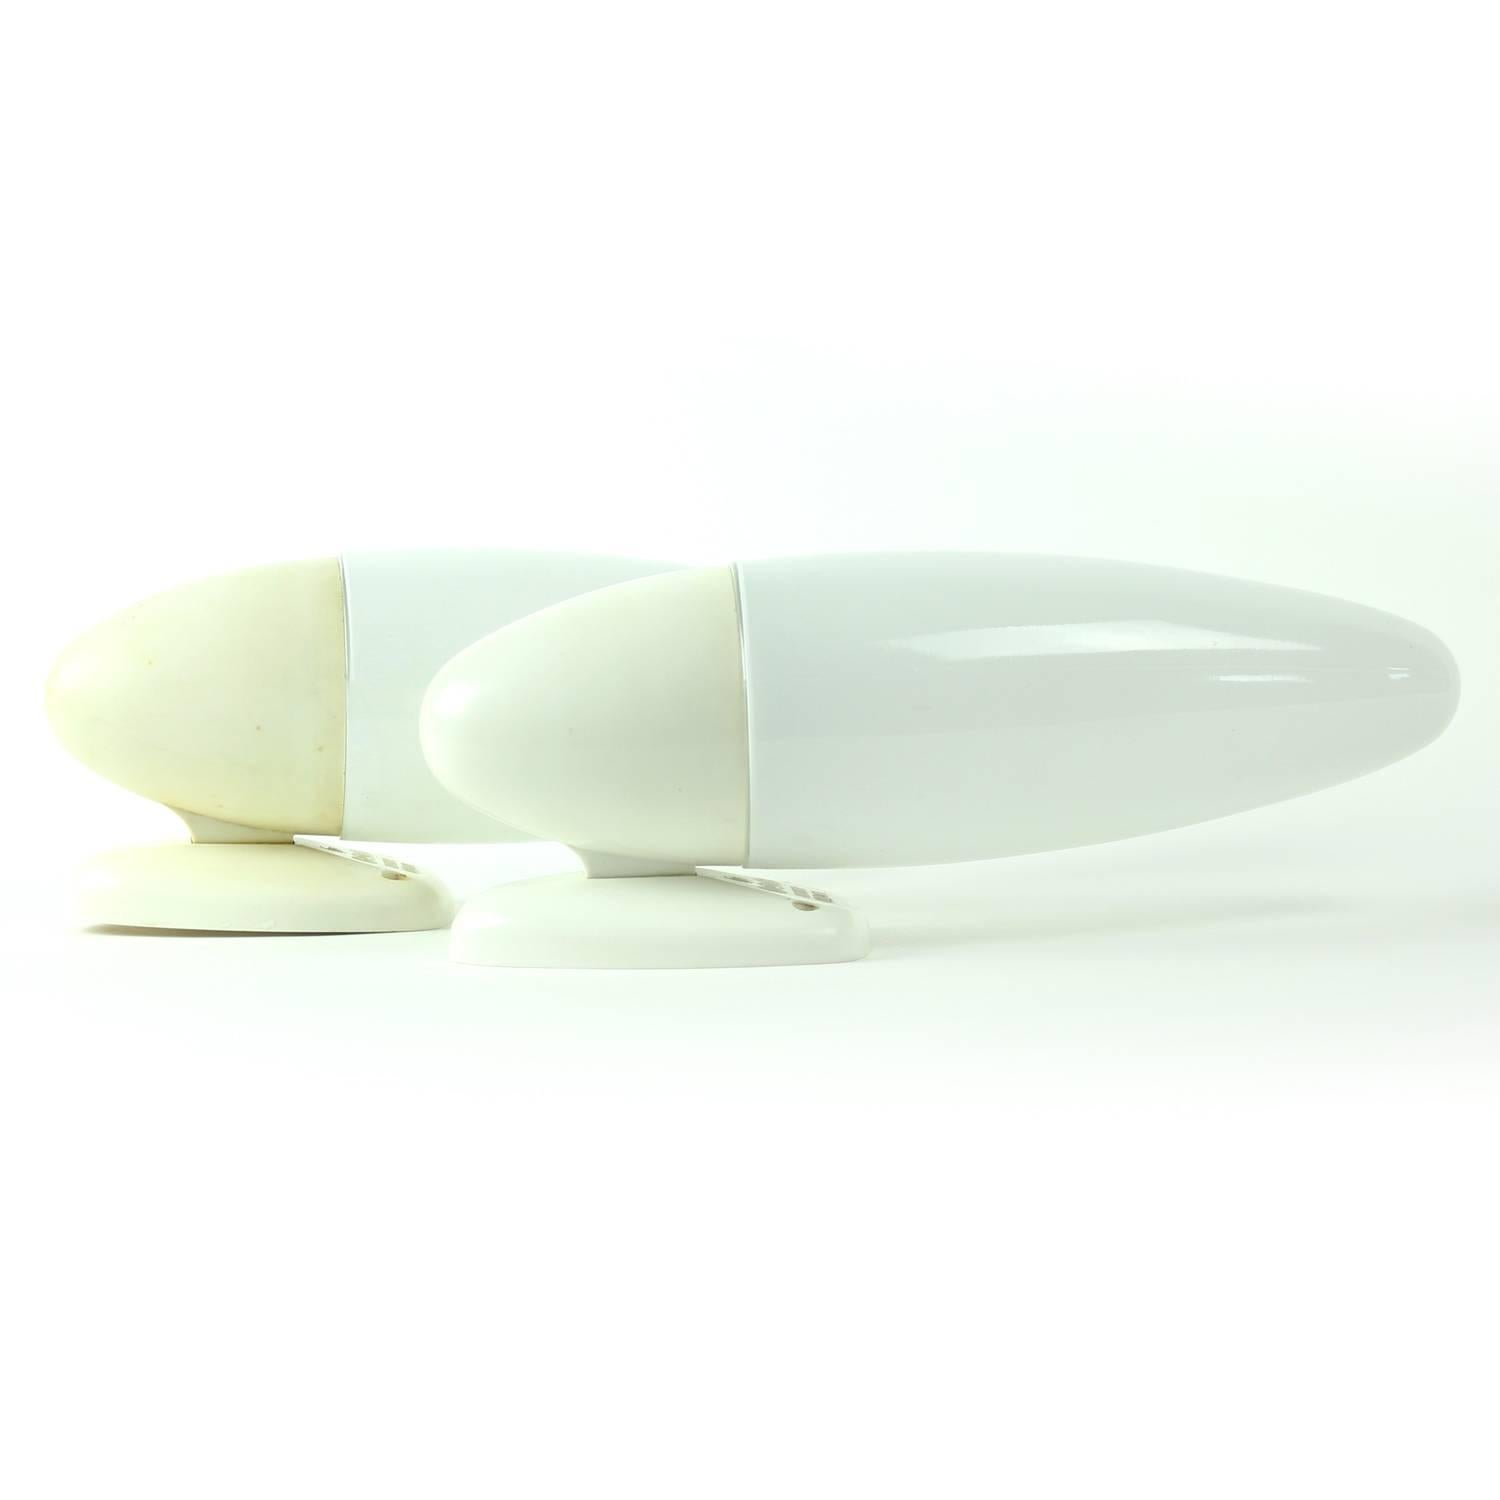 Two all white wall lamps in style of the famous Brusselles era of early 1960. Made in Czechoslovakia, the home design leader at the time. Beautiful, stylish and futuristic shape of the lamp. Shield in white opaline glass screws onto the white